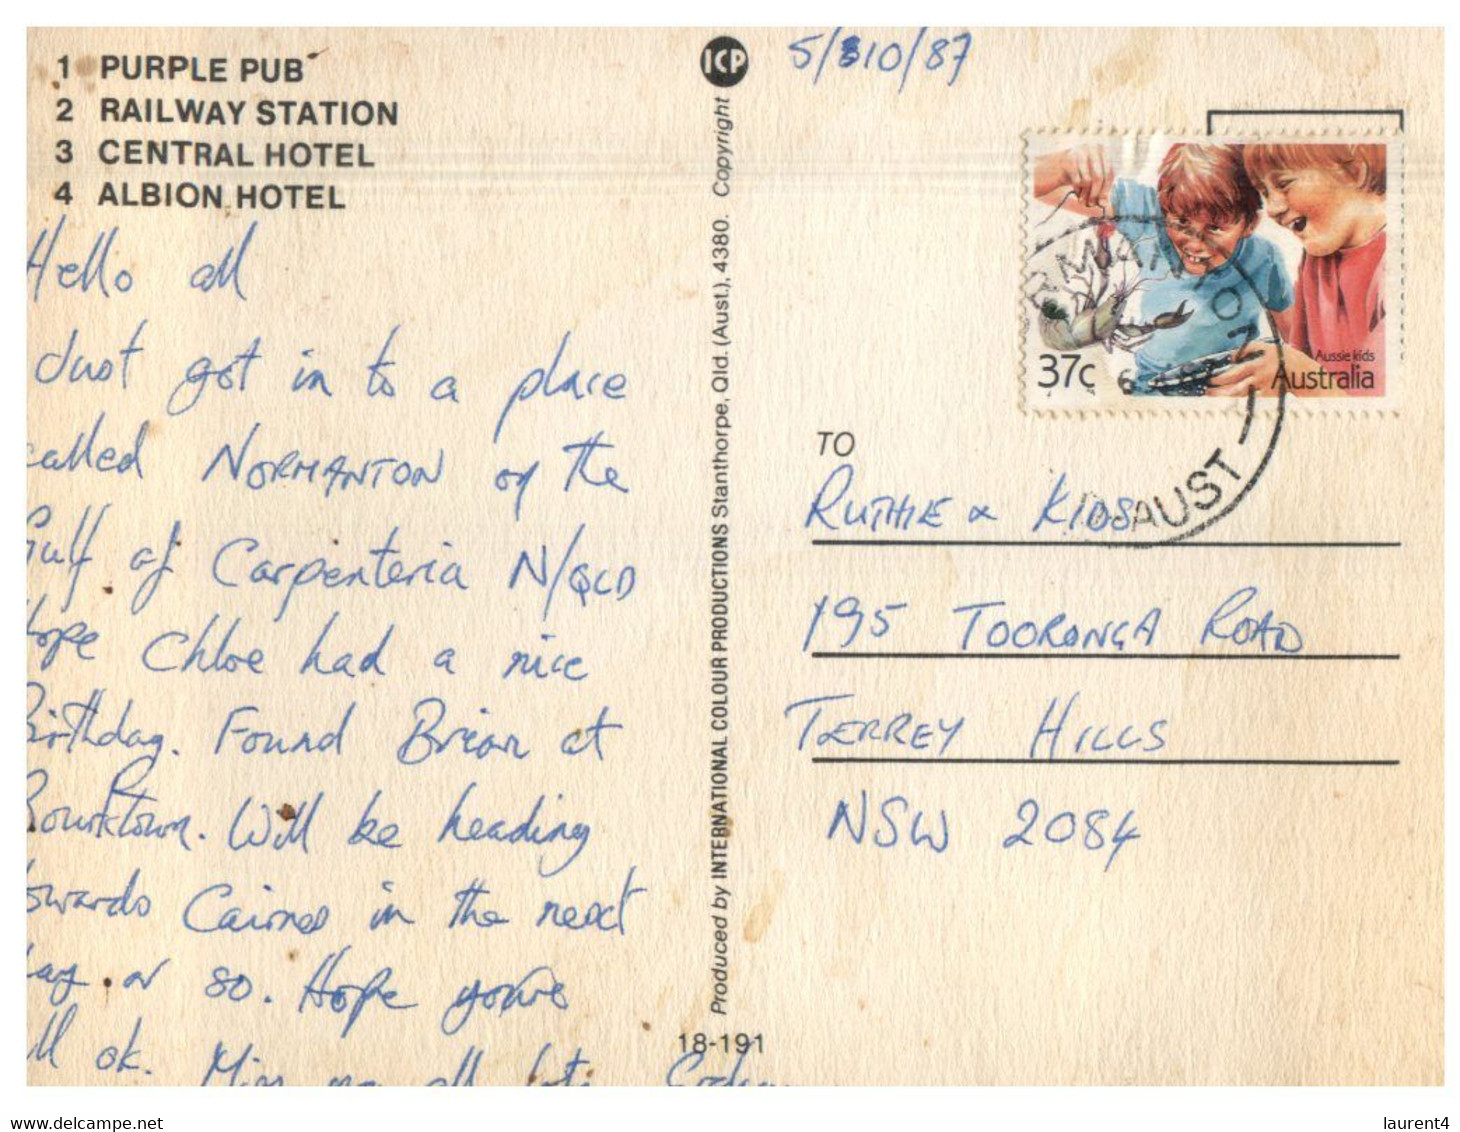 (W11) Australia - QLD - Normanton (with Stamp) 18-191 Posrted In 1987 - Far North Queensland